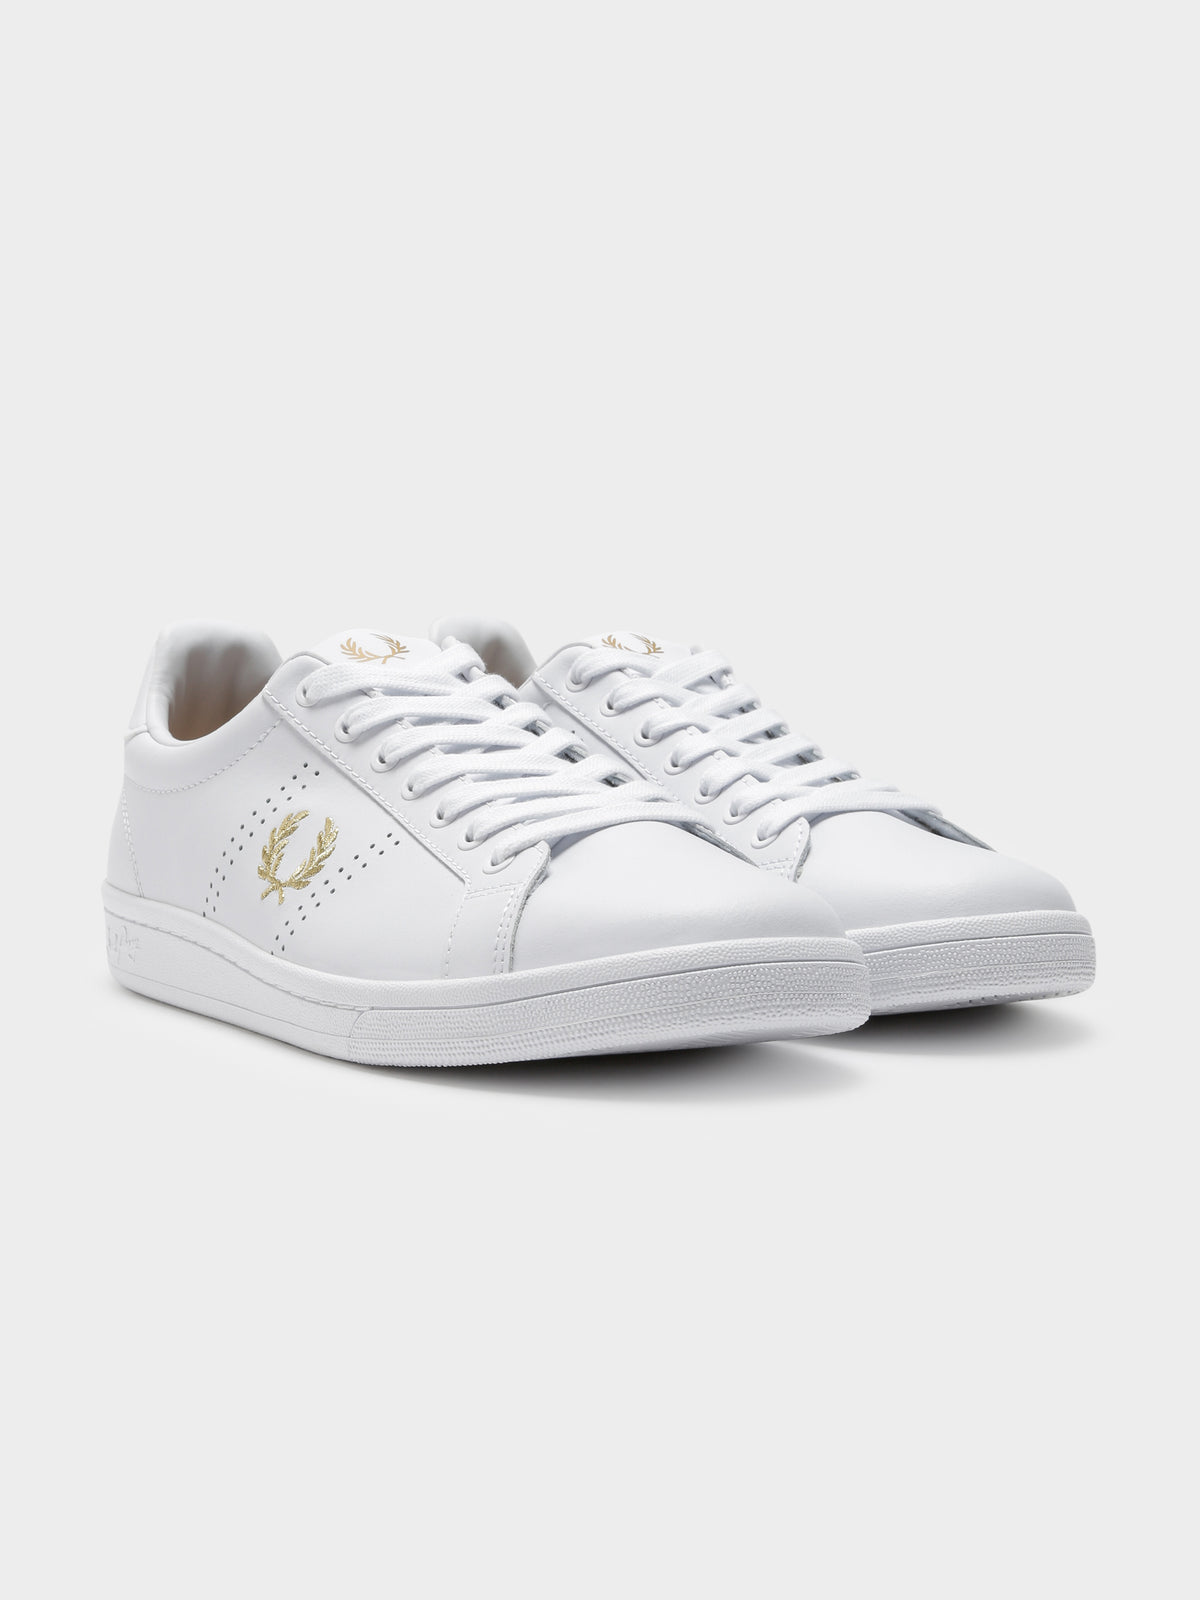 Mens B721 Leather Sneaker in White